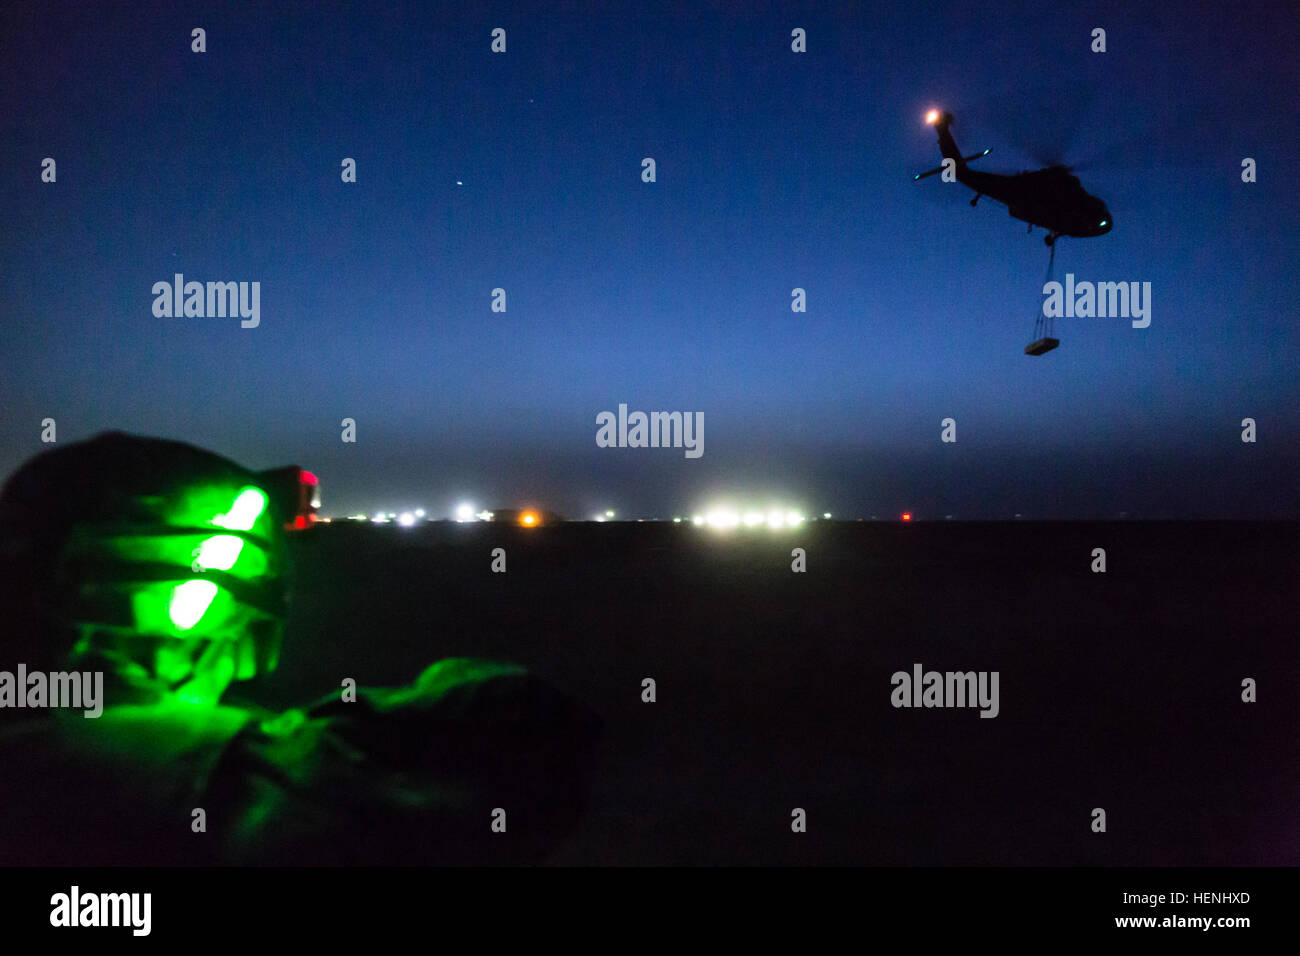 A UH-60 Black Hawk operated by Company A, 3rd Battalion, 142nd Assault Helicopter Battalion, flies off after picking up a 4,000 lb. weight during night sling load operations with the 642nd Aviation Support Battalion on June 5, 2014, in Camp Buehring, Kuwait. The 642nd and 142nd, both under the 42nd Combat Aviation Brigade, New York Army National Guard, are deployed to Kuwait in support of Operation Enduring Freedom. (N.Y. Army National Guard photo by Sgt. Harley Jelis/Released) 642nd Aviation Support Battalion night sling load 140605-A-AR422-106 Stock Photo